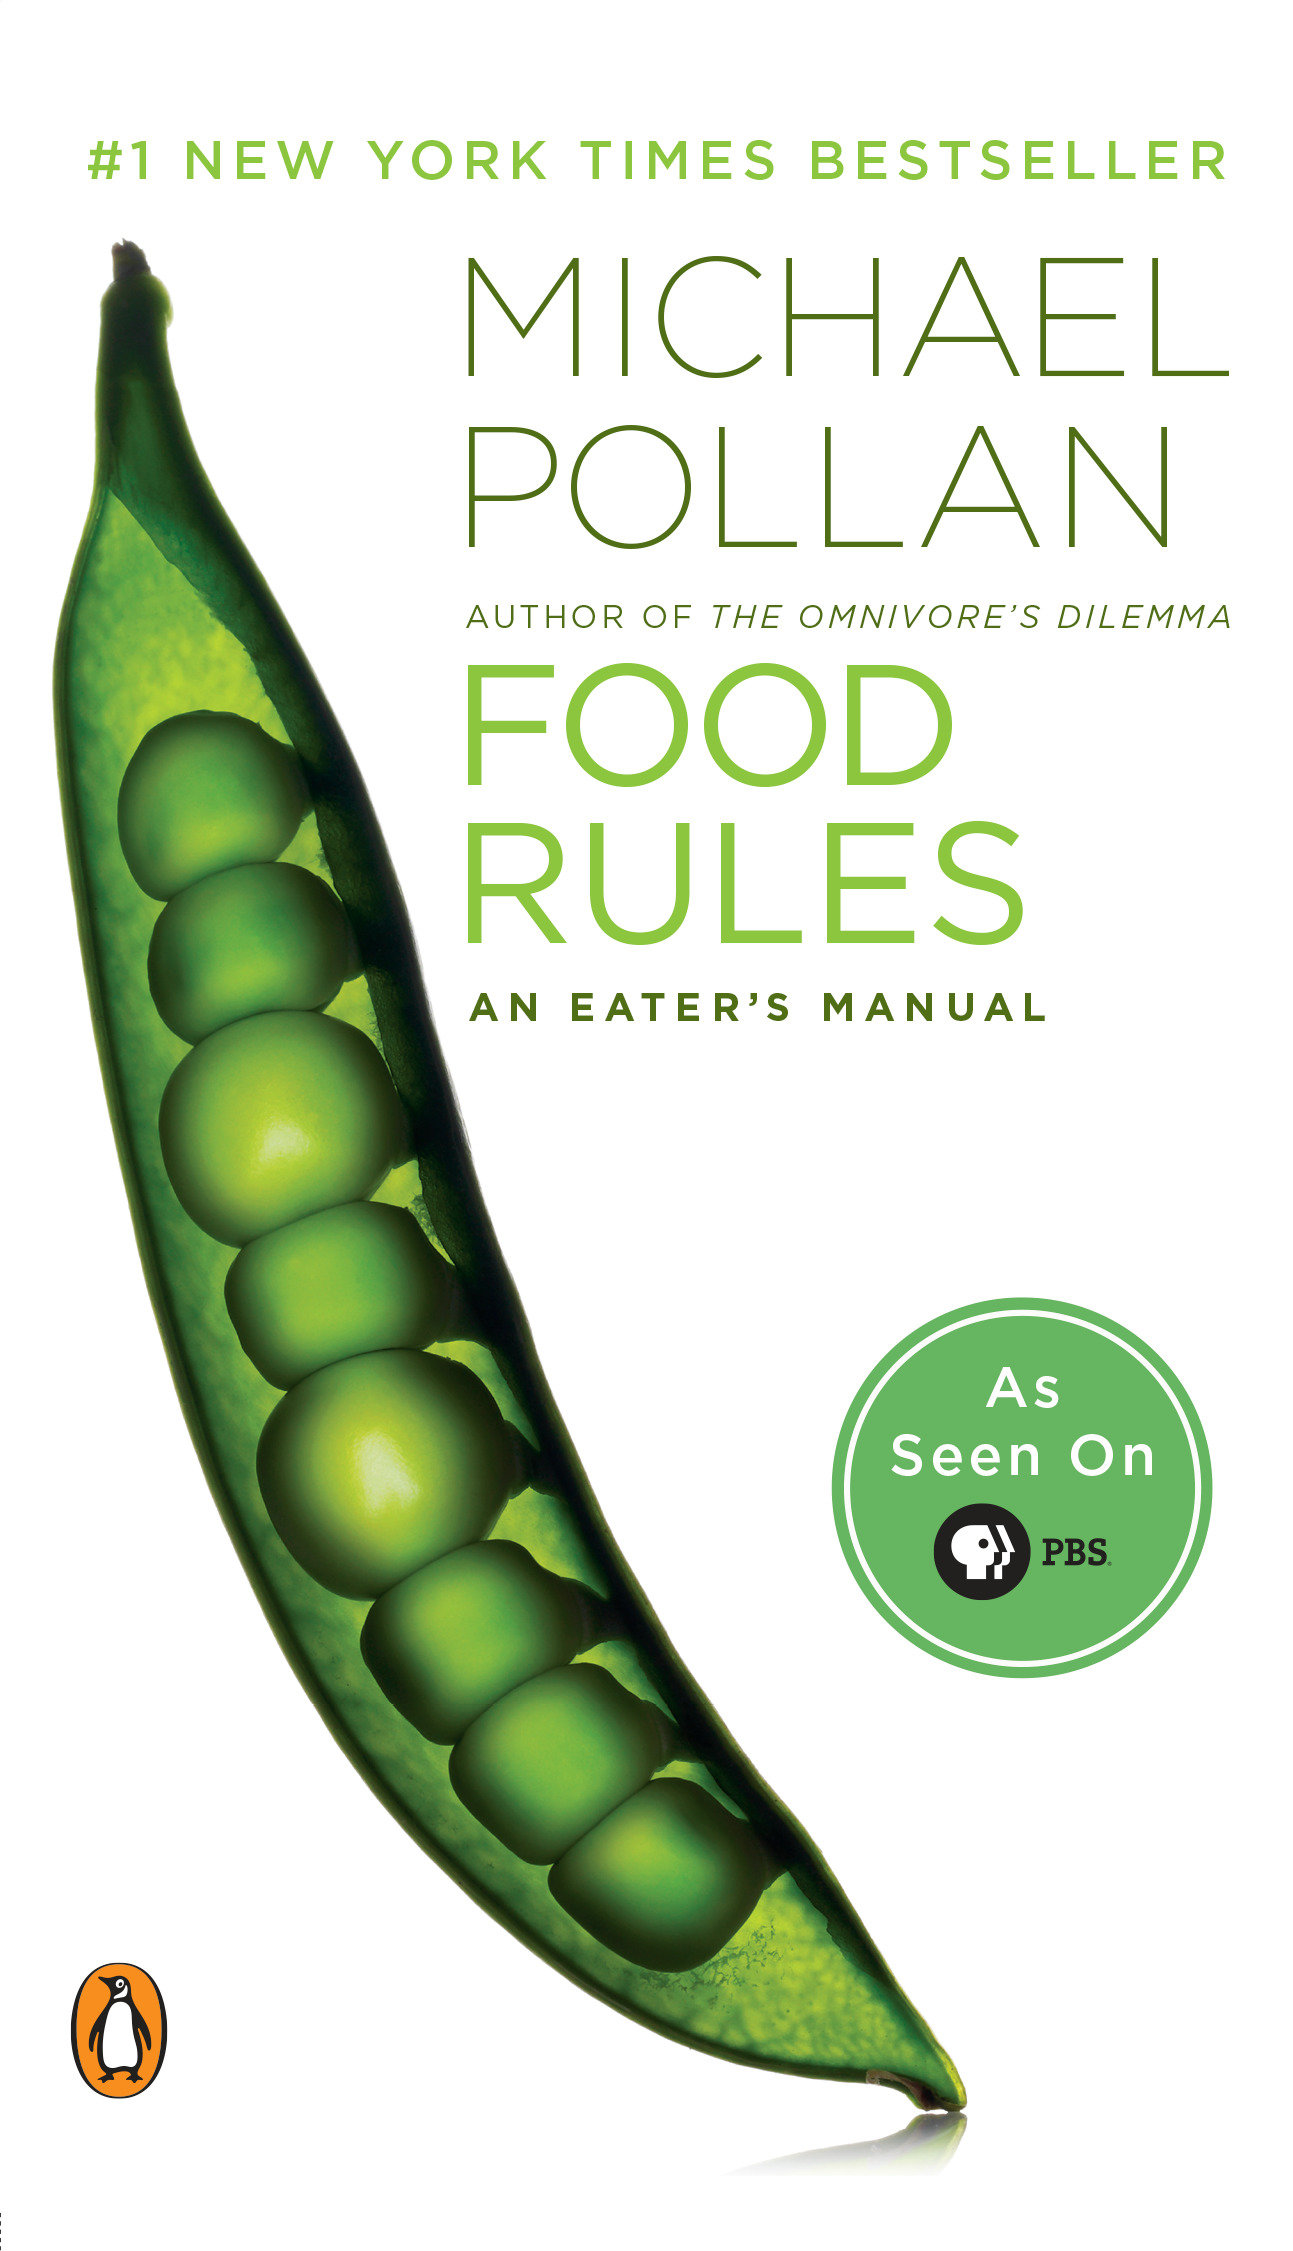 Food rules an eater's manual cover image